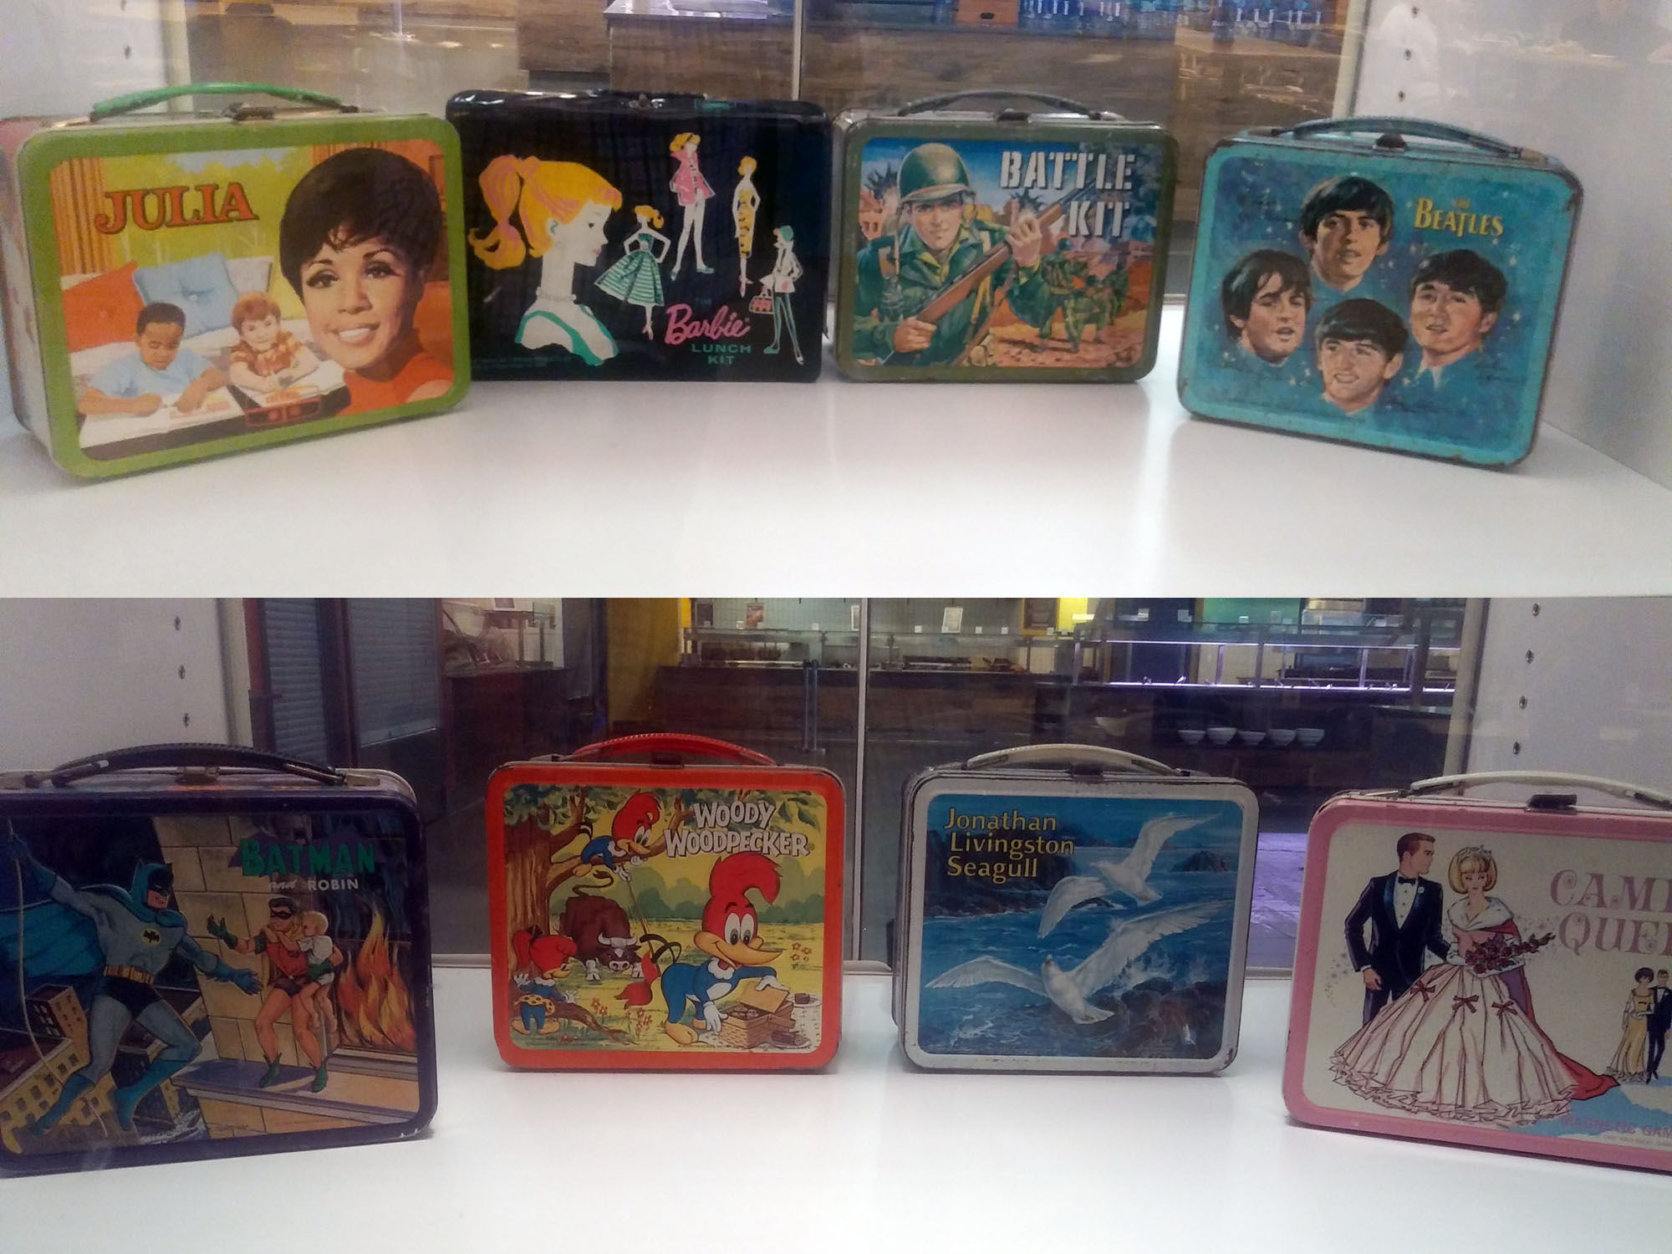 lunchboxes, national history of american history